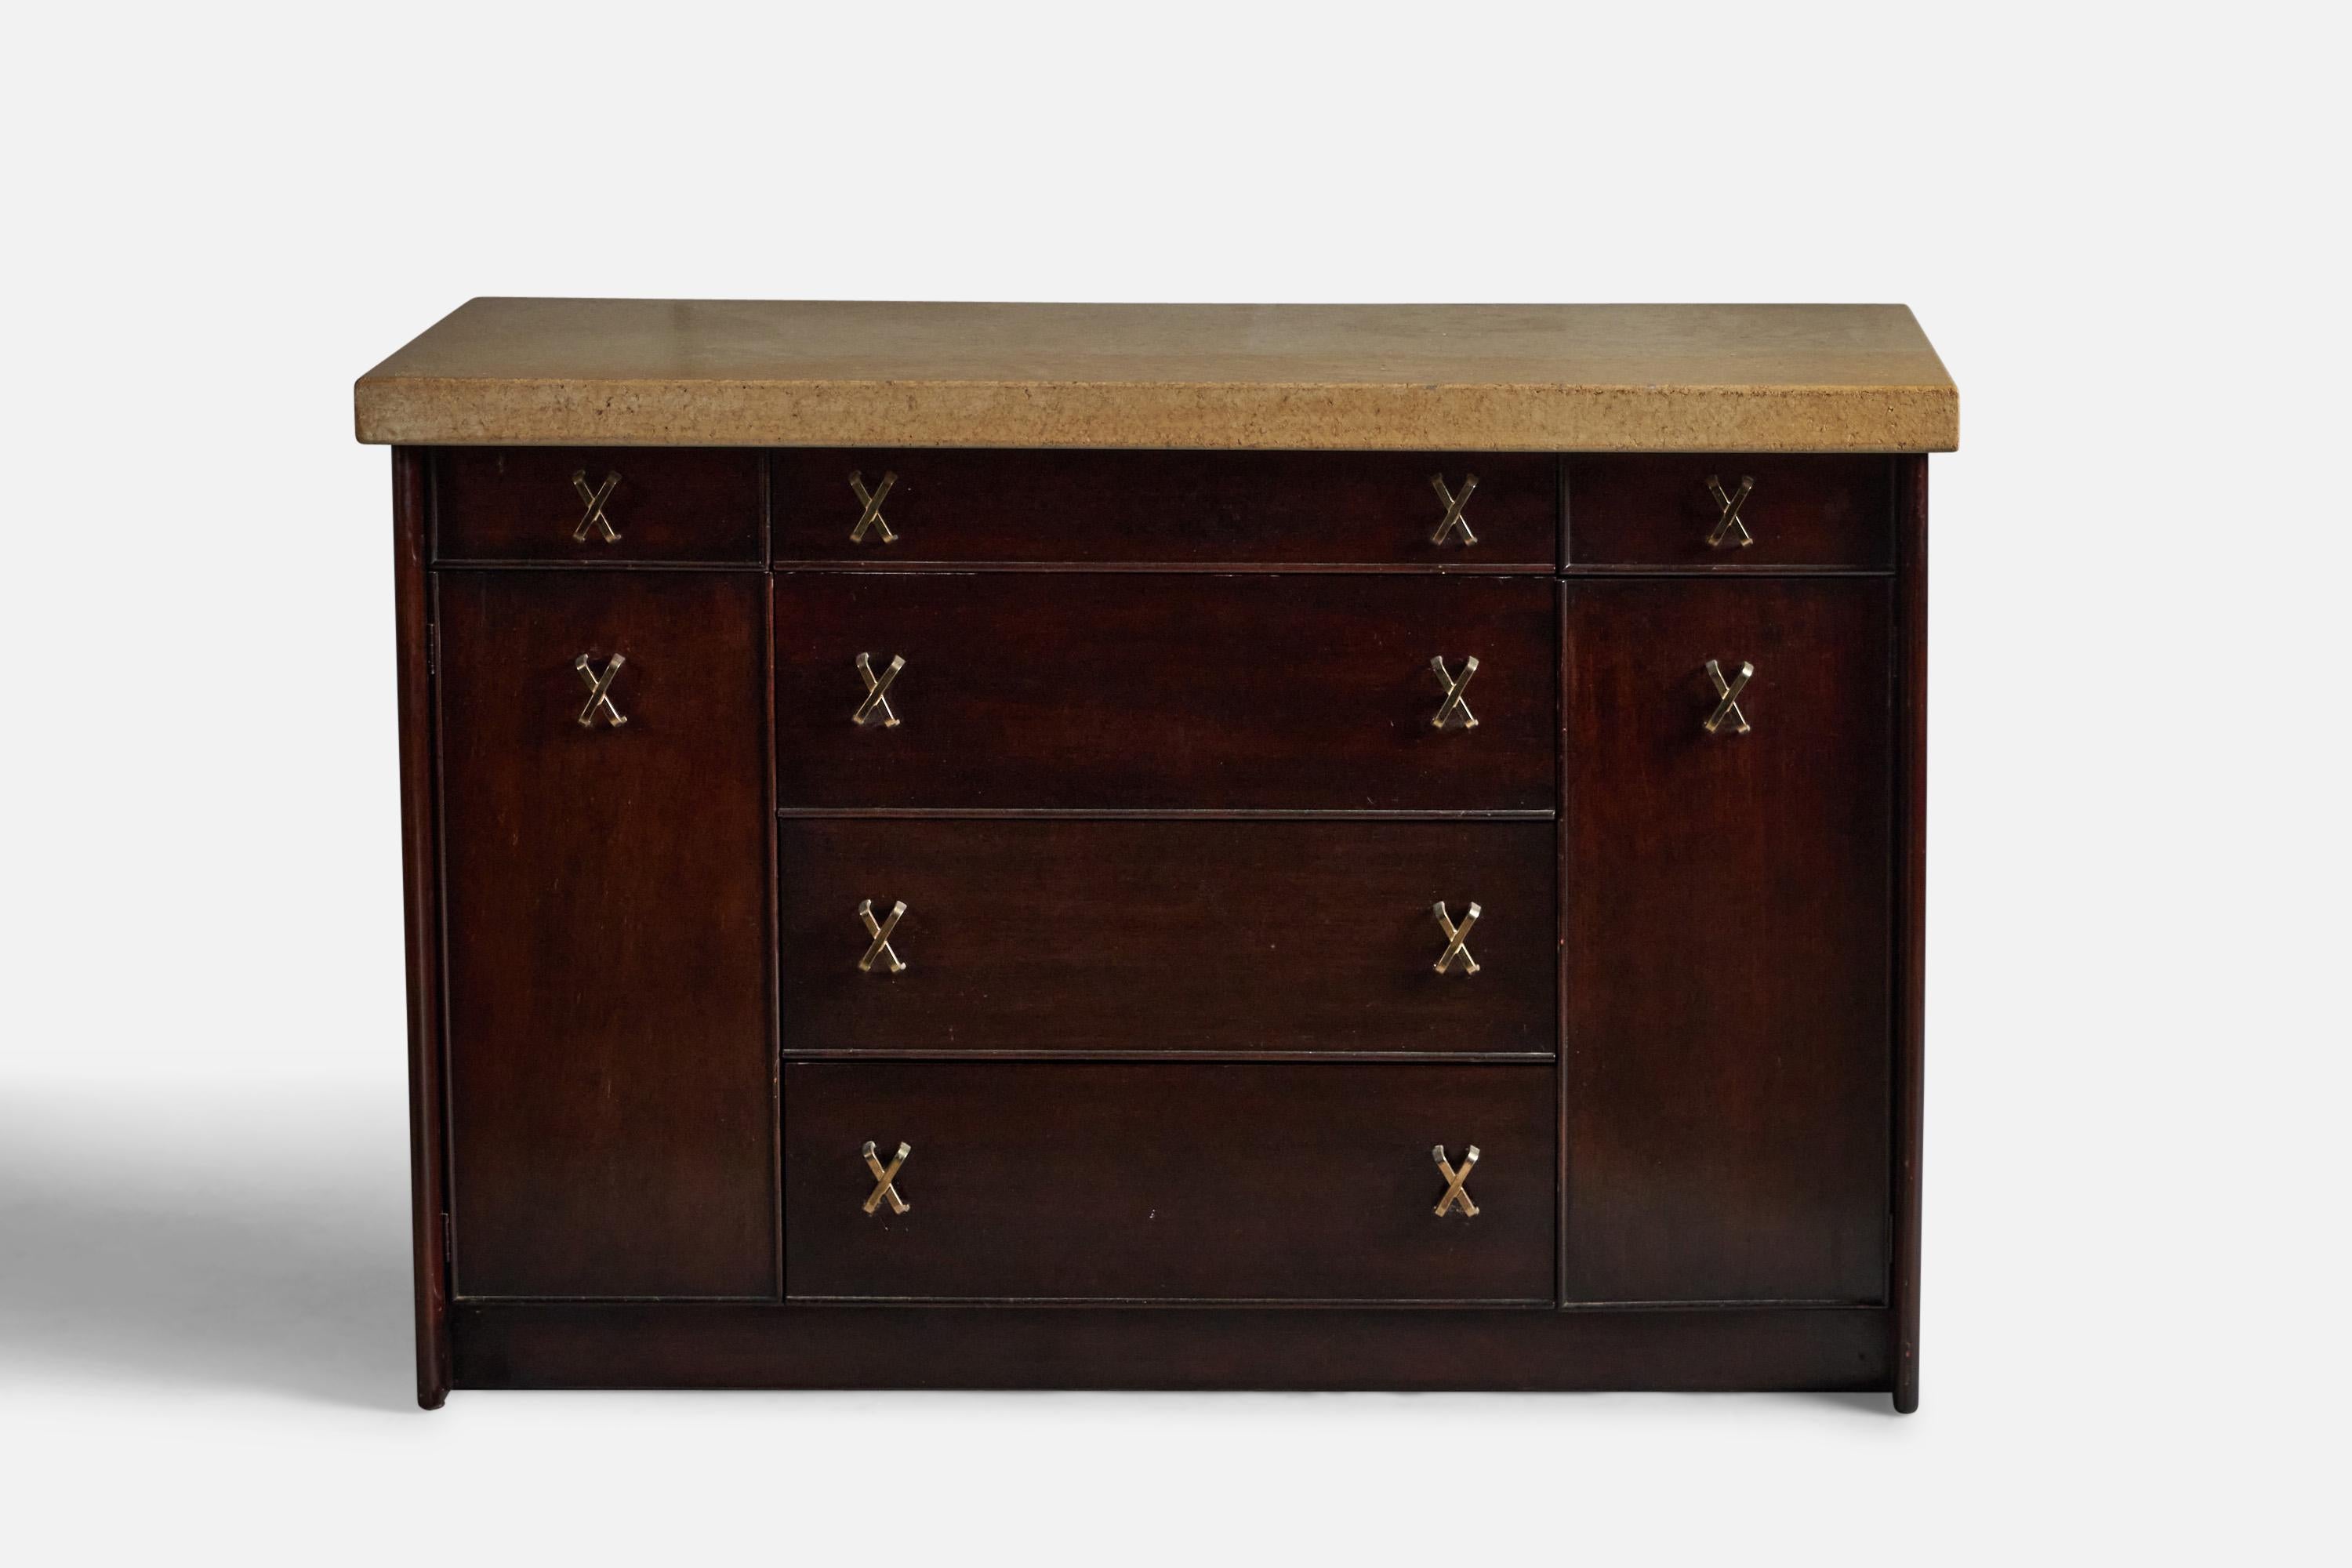 A dark-stained mahogany, brass and cork cabinet, designed by Paul Frankl and produced by Johnson Furniture Company, Grand Rapids, Michigan, USA, c. 1950s.